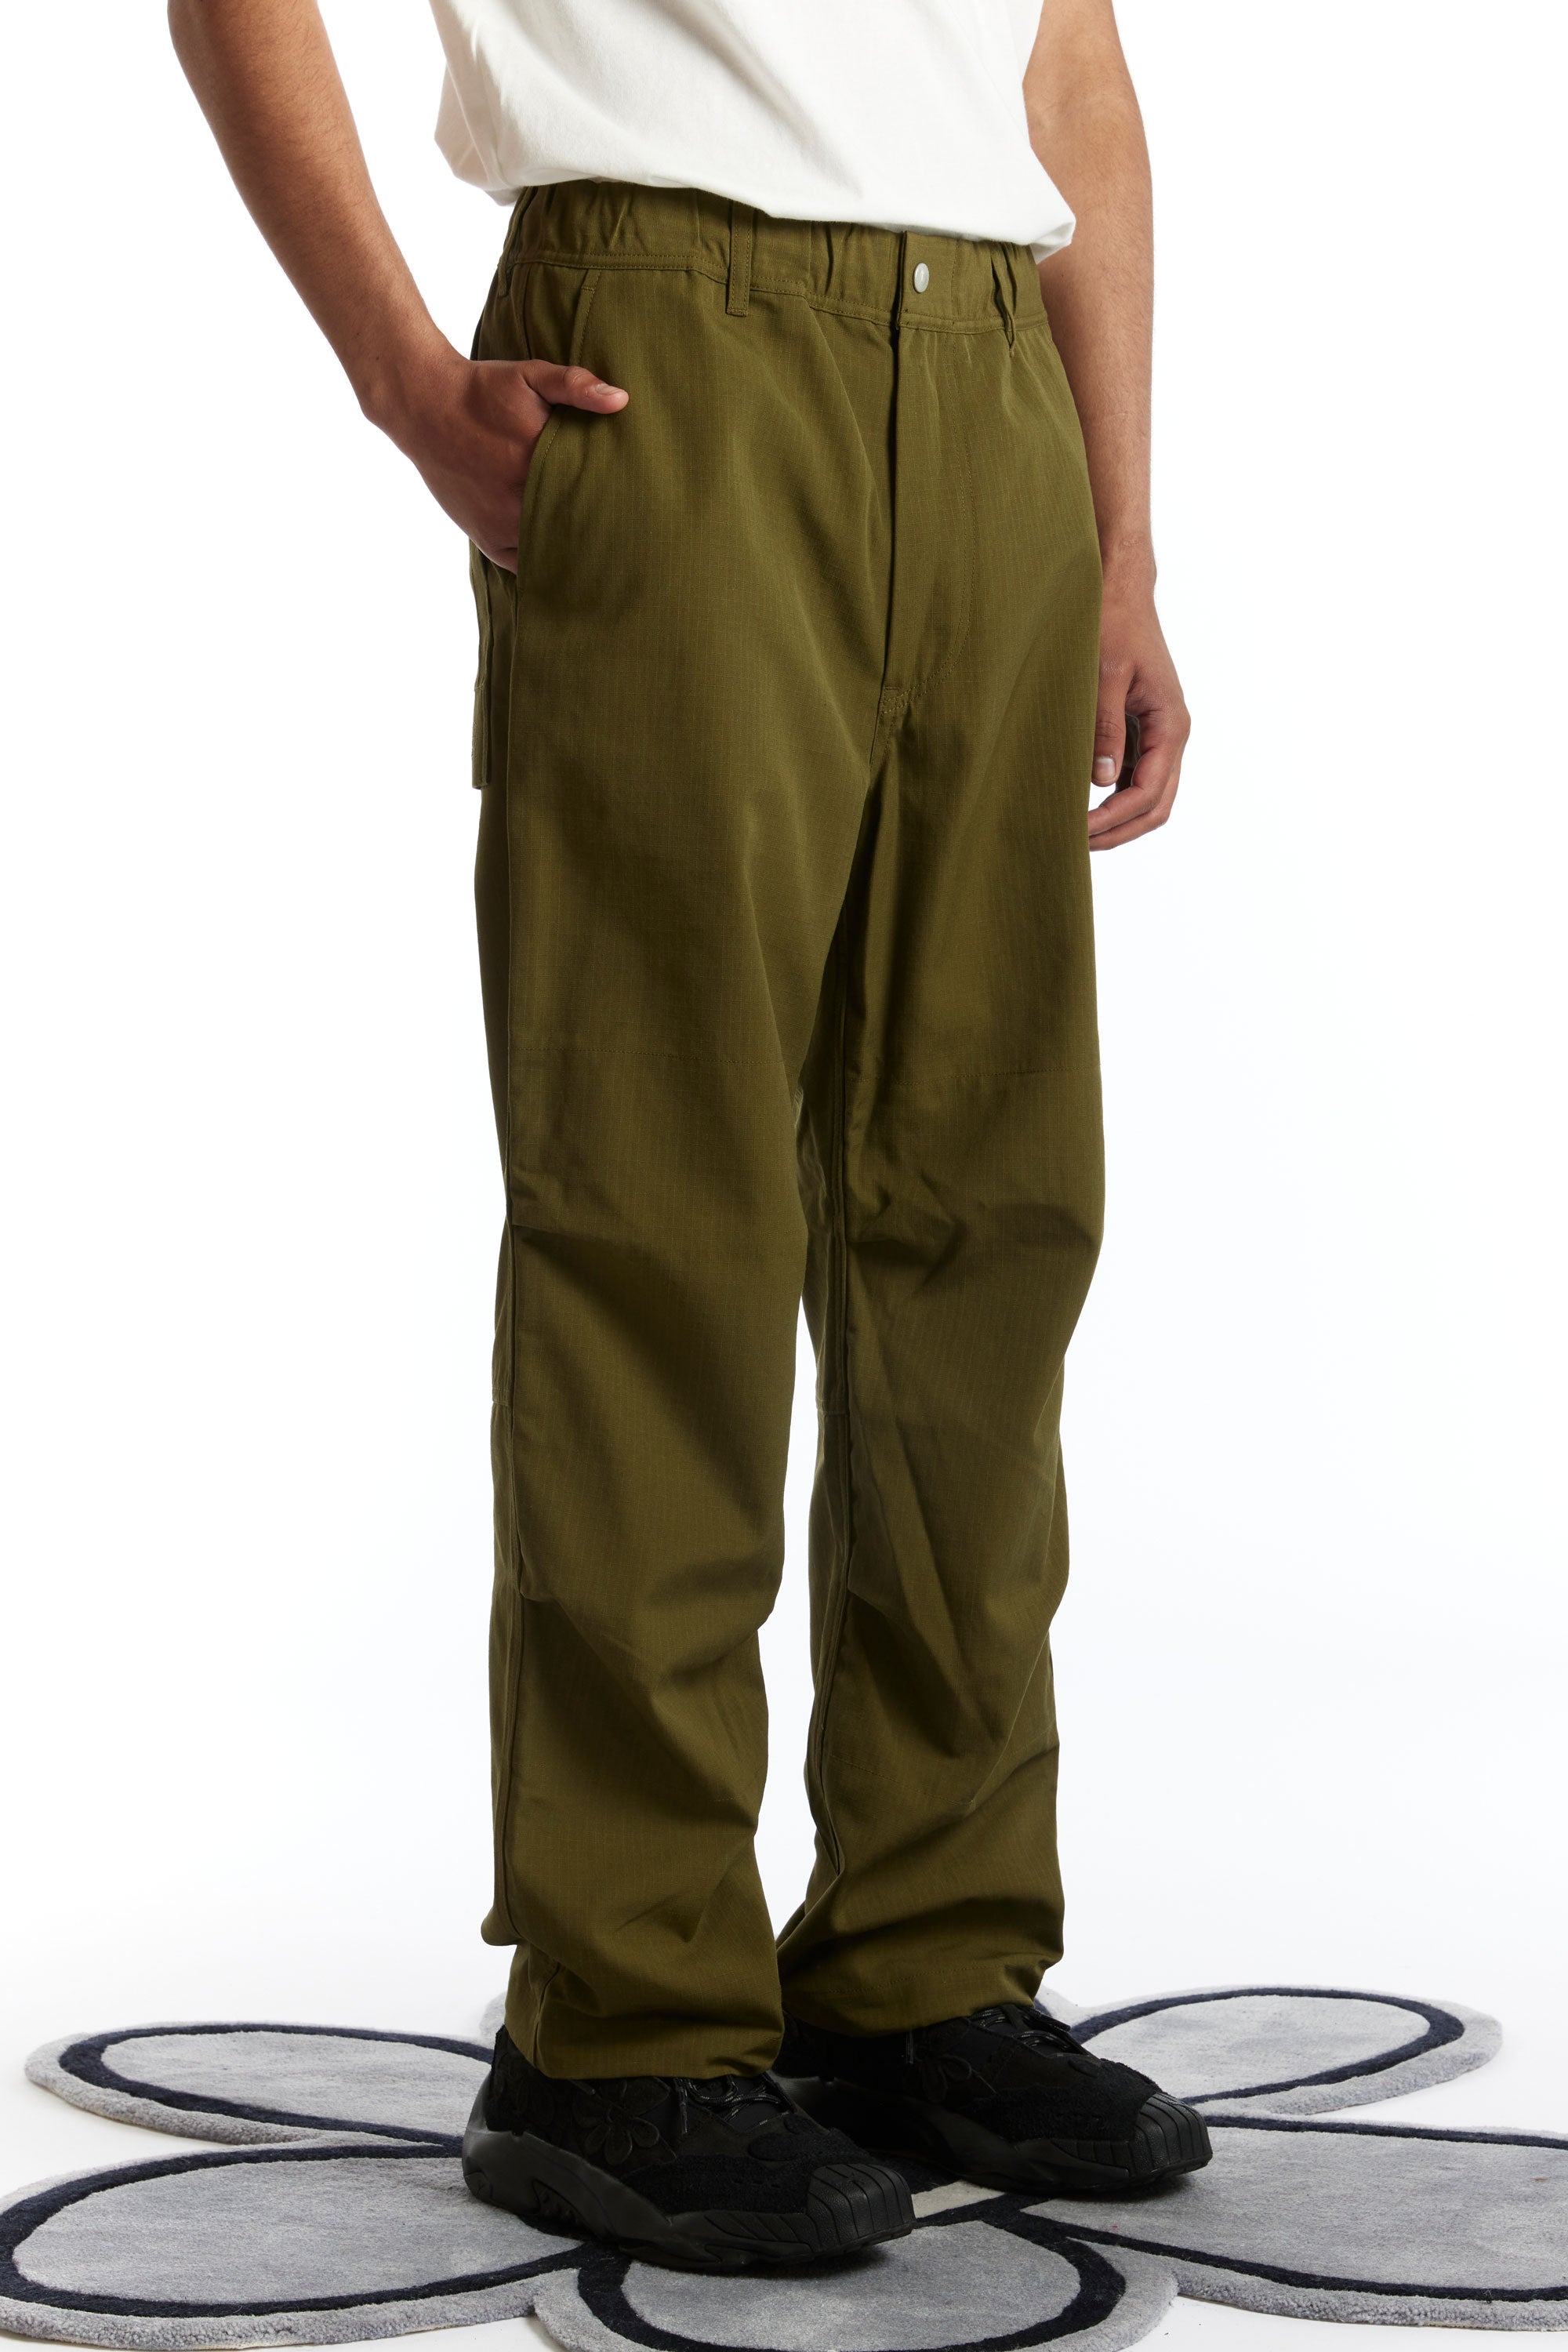 The SNOW PEAK - TAKIBI Pants OLIVE available online with global shipping, and in PAM Stores Melbourne and Sydney.